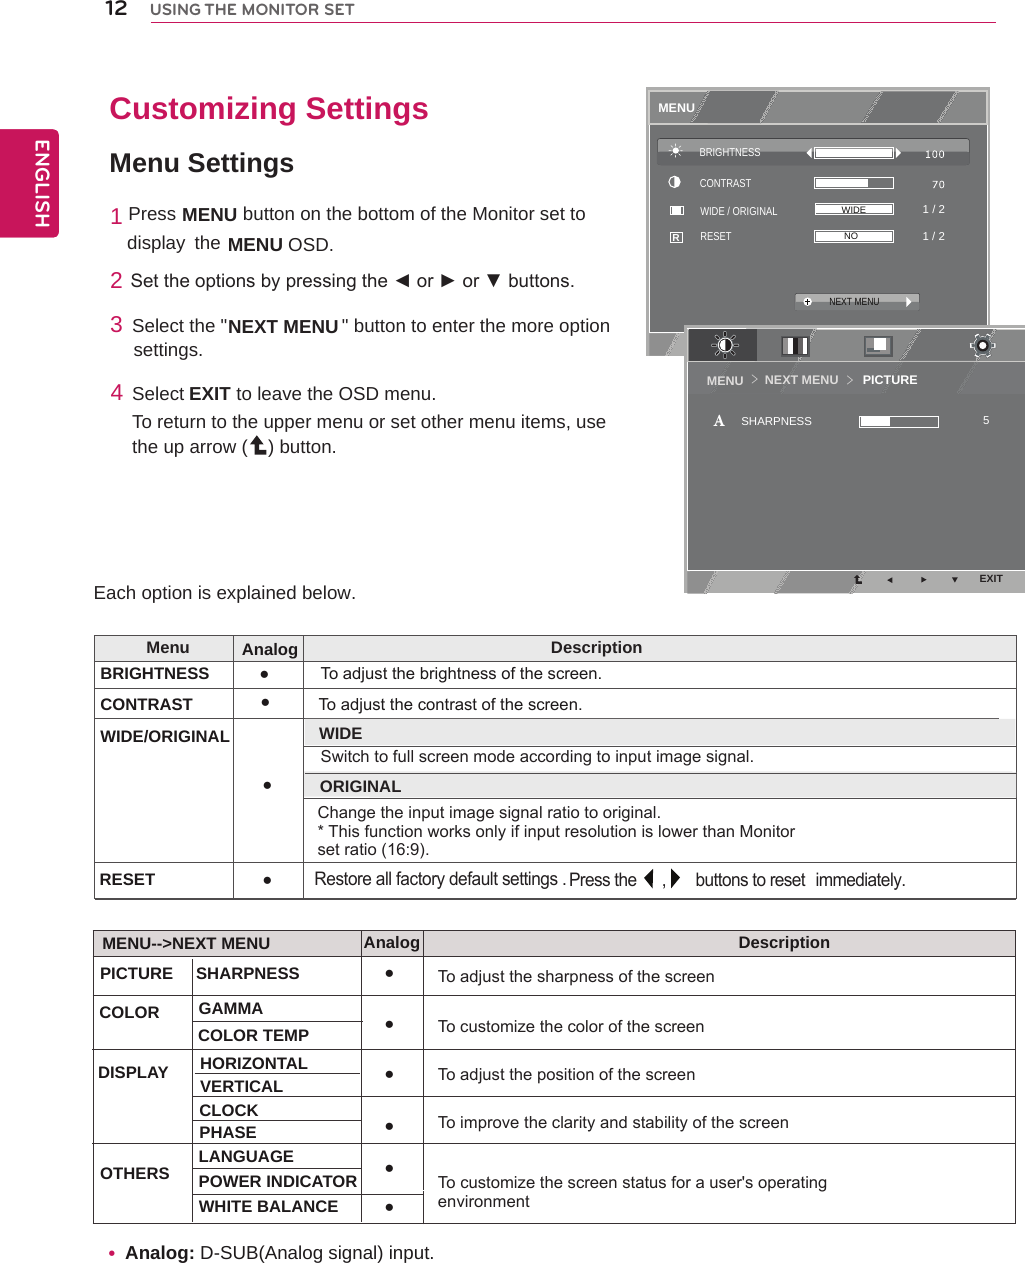 Customizing SettingsMenu Settings yAnalog: D-SUB(Analog signal) input.MENU EXITRWIDE / ORIGINALRESETCONTRASTBRIGHTNESSNONEXT MENU1 / 2 1 / 2 WIDENEXT MENU       PICTUREMENU ＞＞EXIT5SHARPNESSA12ENGENGLISHUSING THE MONITOR SET1  Press MENU   button on the bottom of the Monitor set to  display  the MENU OSD.  2 Settheoptionsbypressingthe◄or►or▼buttons.3 Select the &quot;                      &quot; button to enter the more optionNEXT MENU settings. 4 Select EXIT to leave the OSD menu.To return to the upper menu or set other menu items, use the up arrow ( ) button. Each option is explained below.Analog DescriptionPICTURE ●To adjust the sharpness of the screen To customize the color of the screen To adjust the position of the screenTo improve the clarity and stability of the screen To customize the screen status for a user&apos;s operating environmentCOLOR ●GAMMACOLOR TEMPDISPLAY HORIZONTALVERTICAL ●CLOCKPHASE ●OTHERS LANGUAGEPOWER INDICATOR ●WHITE BALANCE ●SHARPNESSMenu DescriptionBRIGHTNESS To adjust the brightness of the screen. CONTRAST To adjust the contrast of the screen.WIDE/ORIGINALRESETWIDESwitch to full screen mode according to input image signal.Change the input image signal ratio to original.* This function works only if input resolution is lower than Monitorset ratio (16:9).ORIGINALRestoreall factory default settings .Press the  , buttons to reset immediately.Analog●●●●MENU--&gt;NEXT MENU